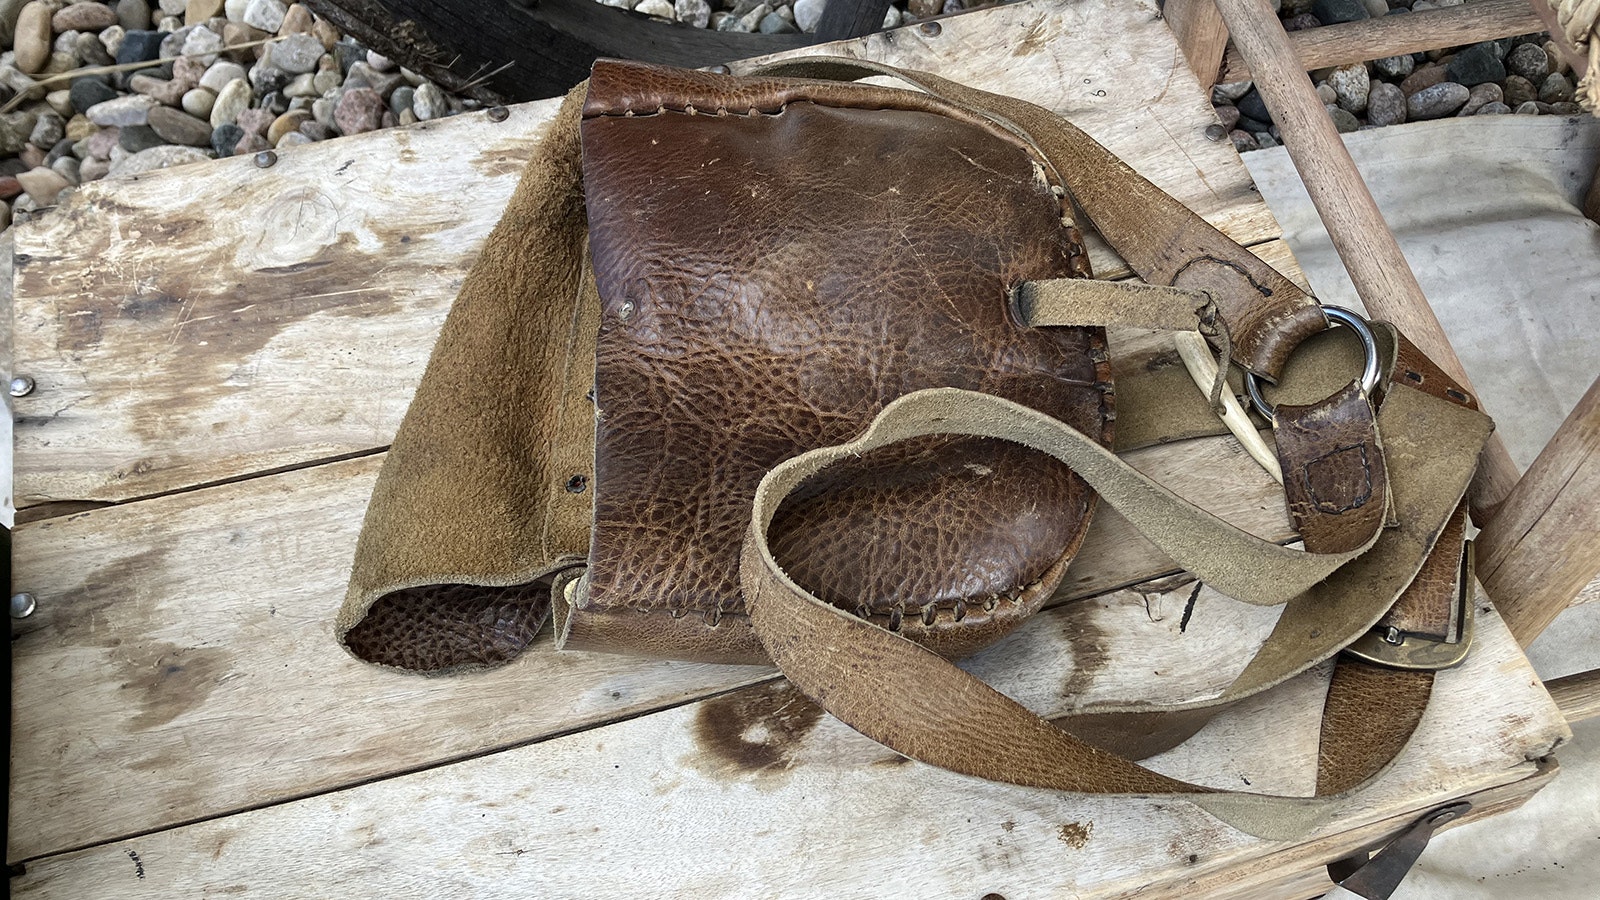 The leather “possibles” bag was used to carry weapon’s related equipment. The bag was so-named because emigrants would try to put whatever was “possible” in it, Kim Merchant said.